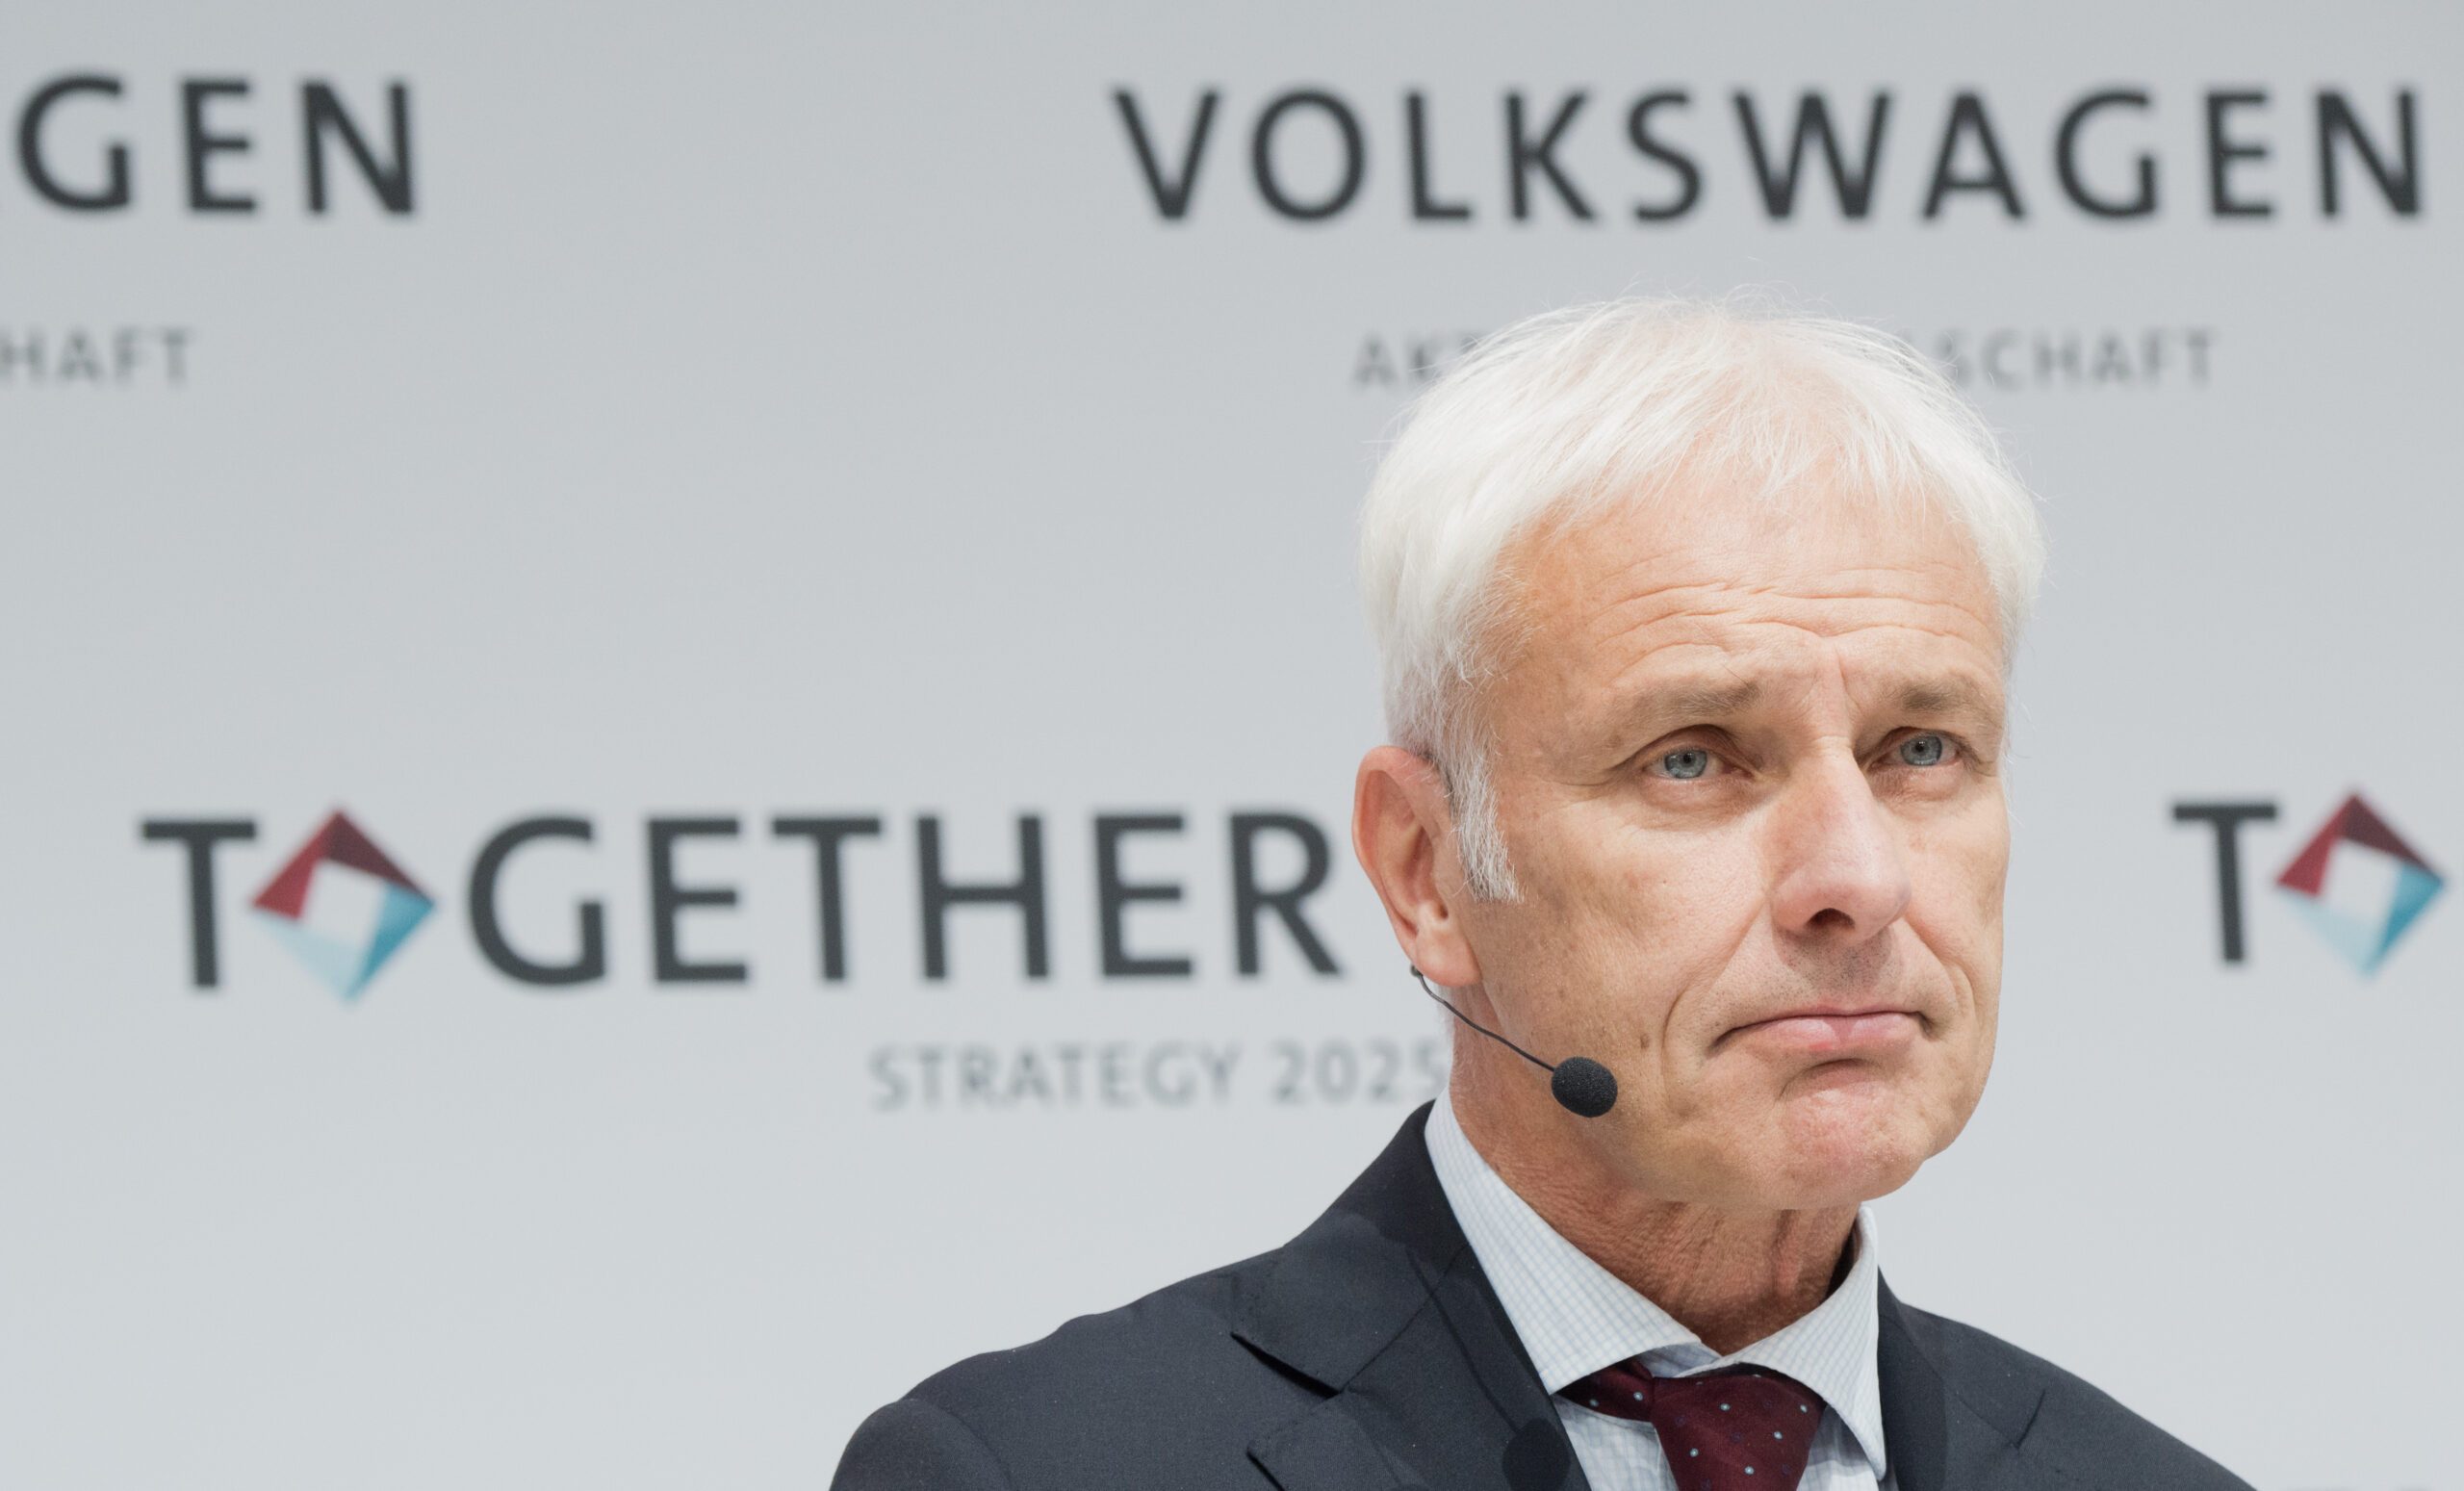 Volkswagen execs named in new emissions lawsuits